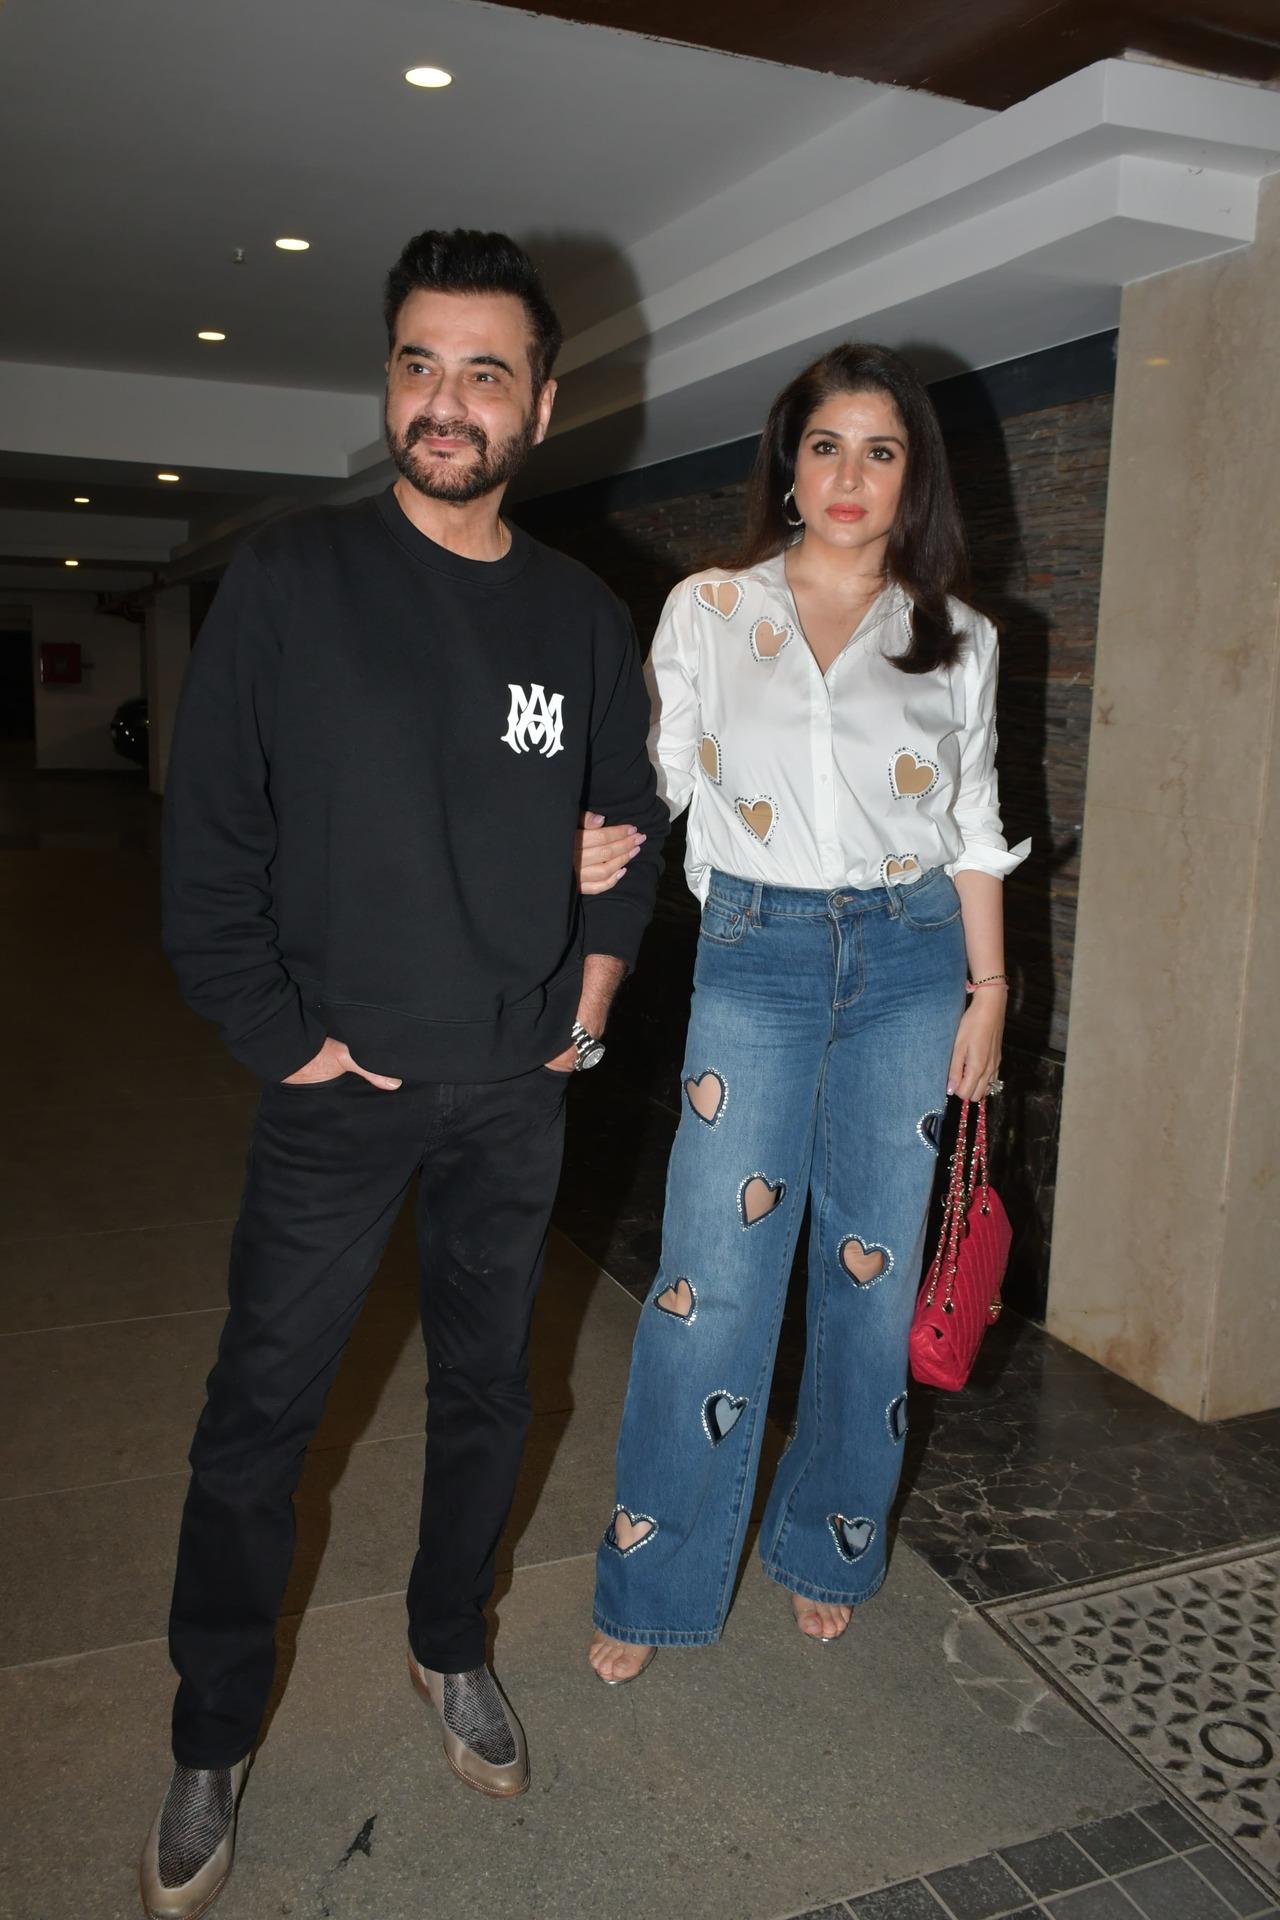 Sanjay Kapoor and Maheep Kapoor pose hand-in-hand as they arrive for the party